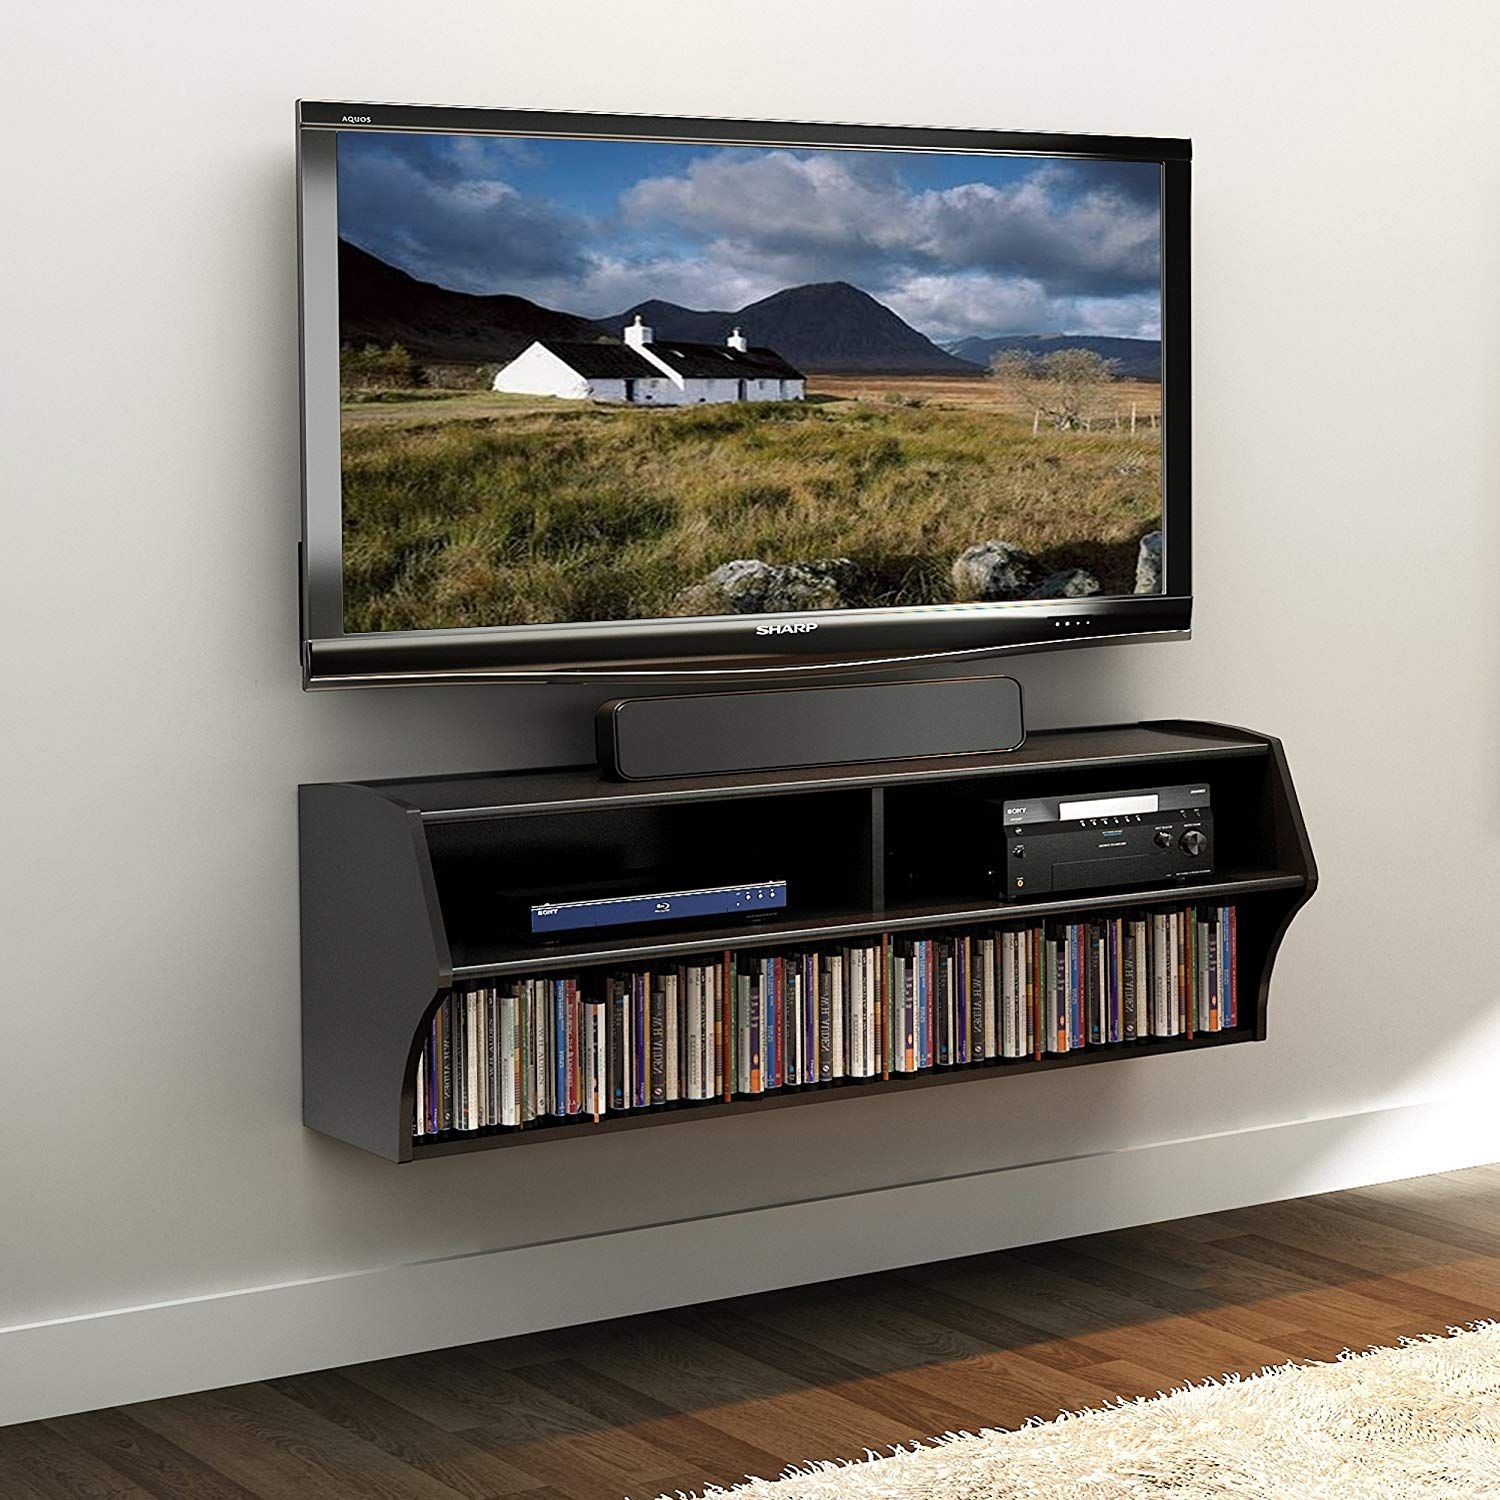 Wall units for dvd players and sky box